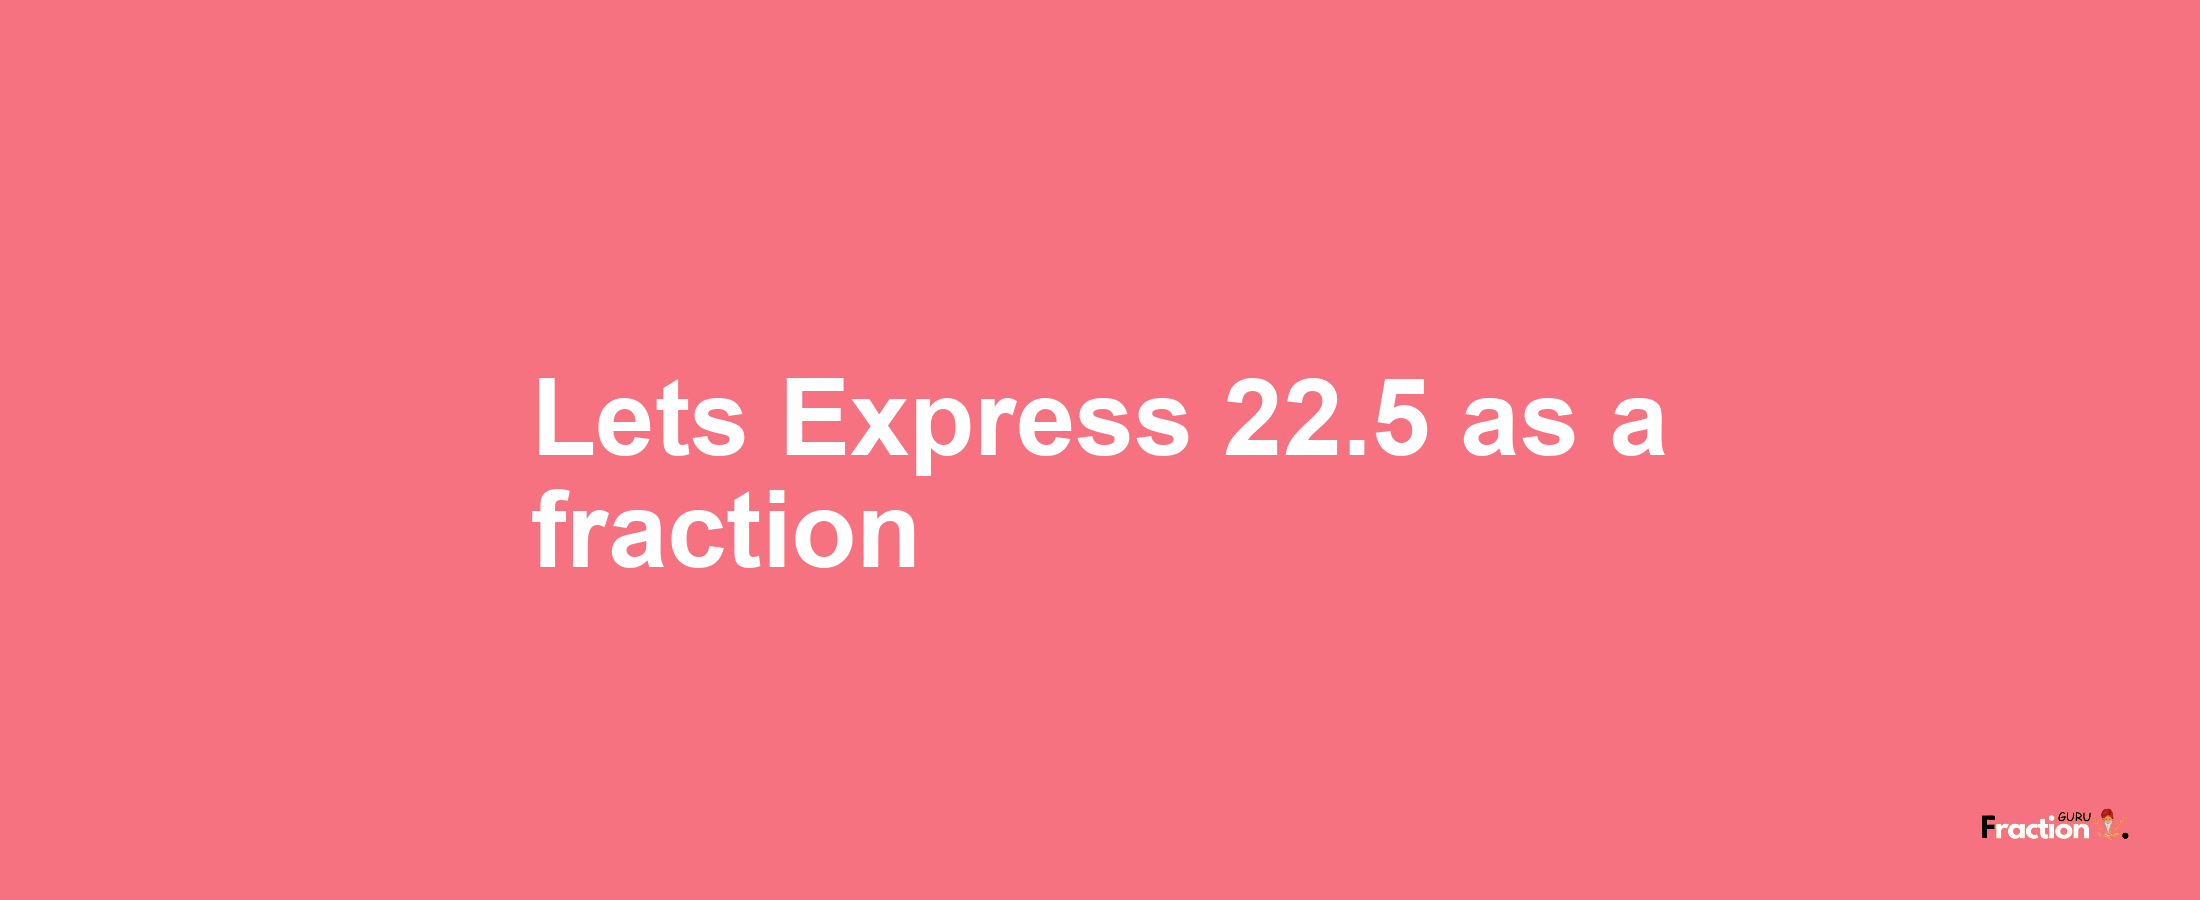 Lets Express 22.5 as afraction